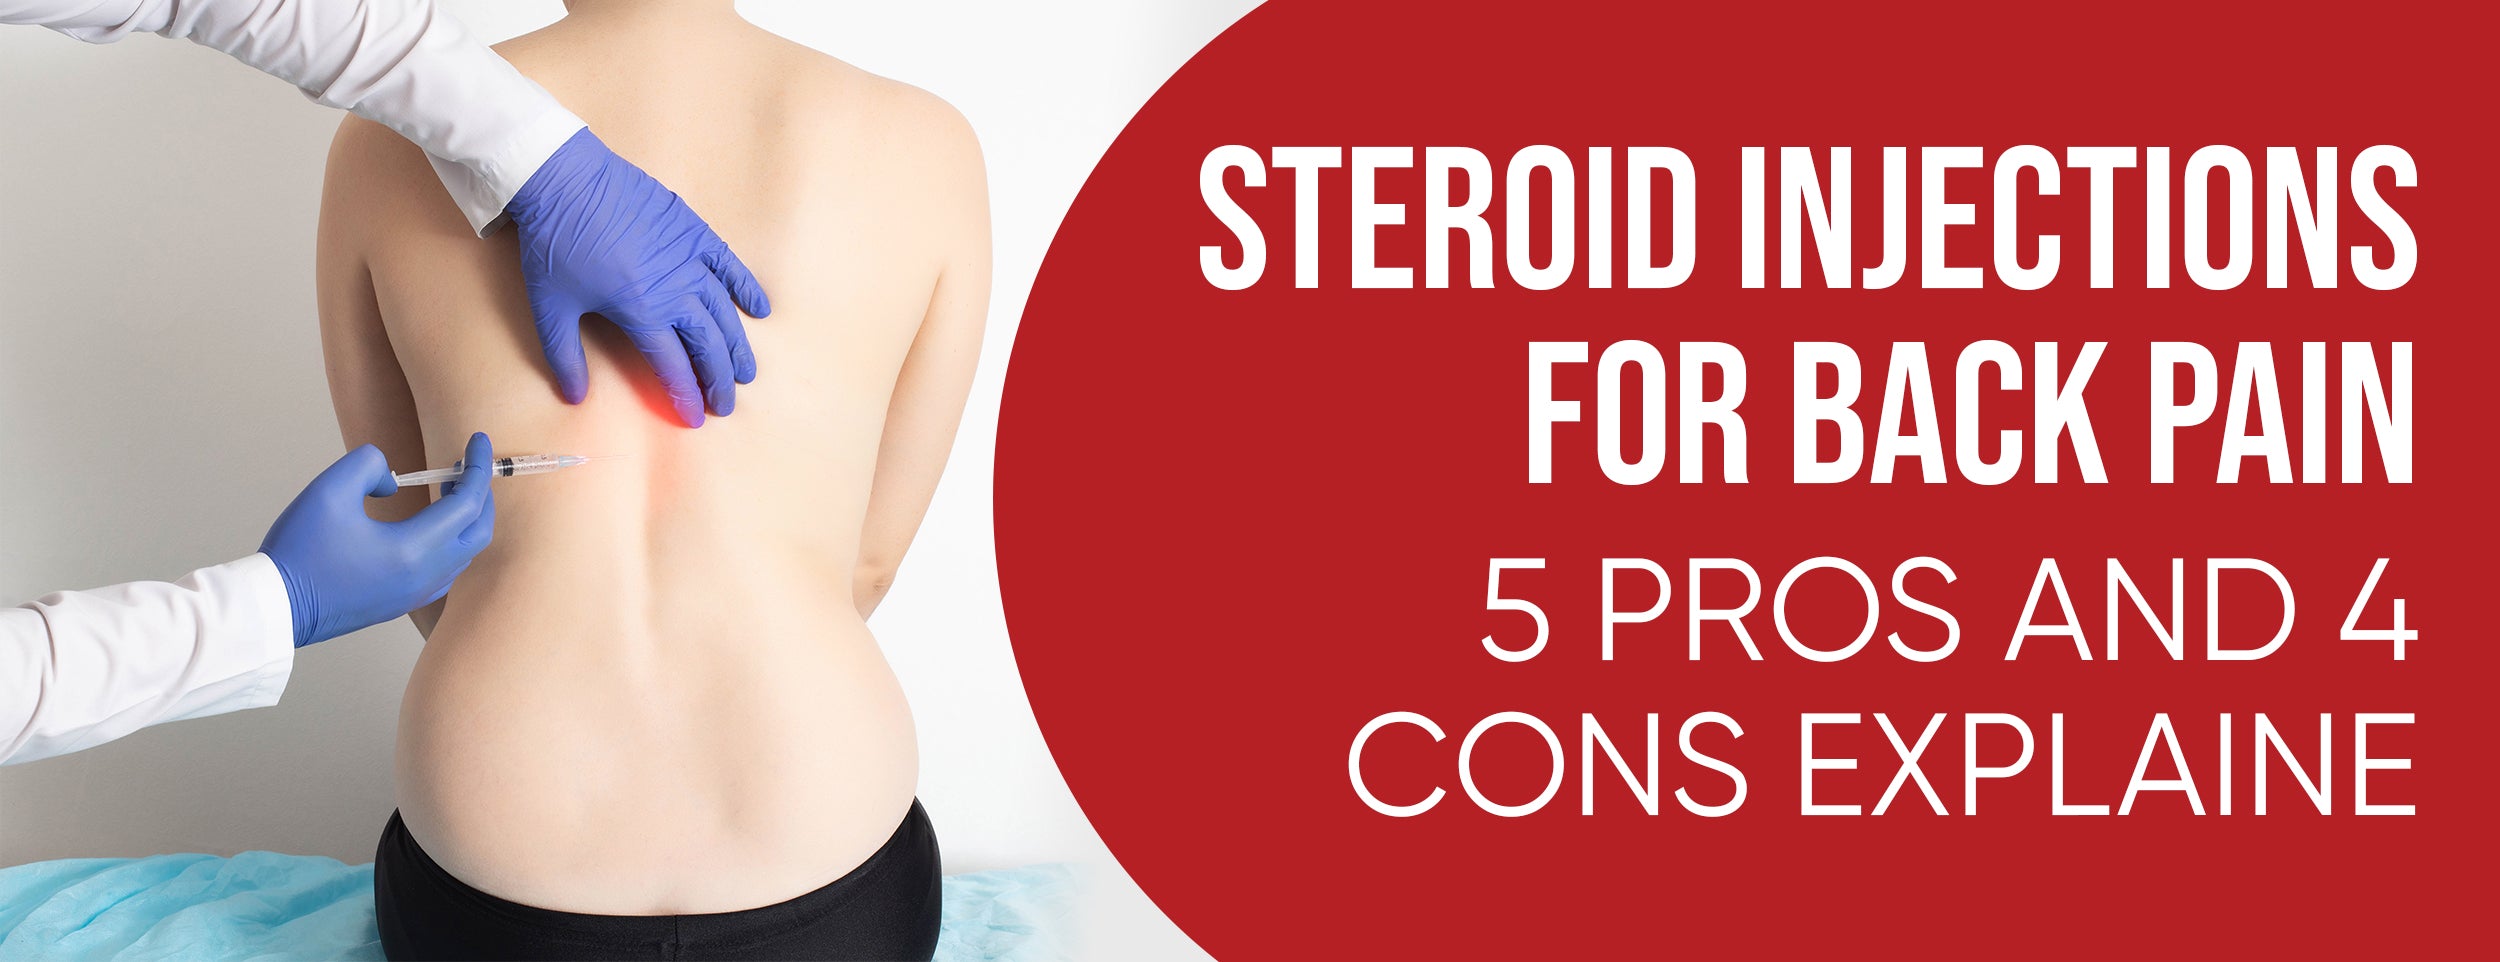 The pros and cons of steroid injections for back pain